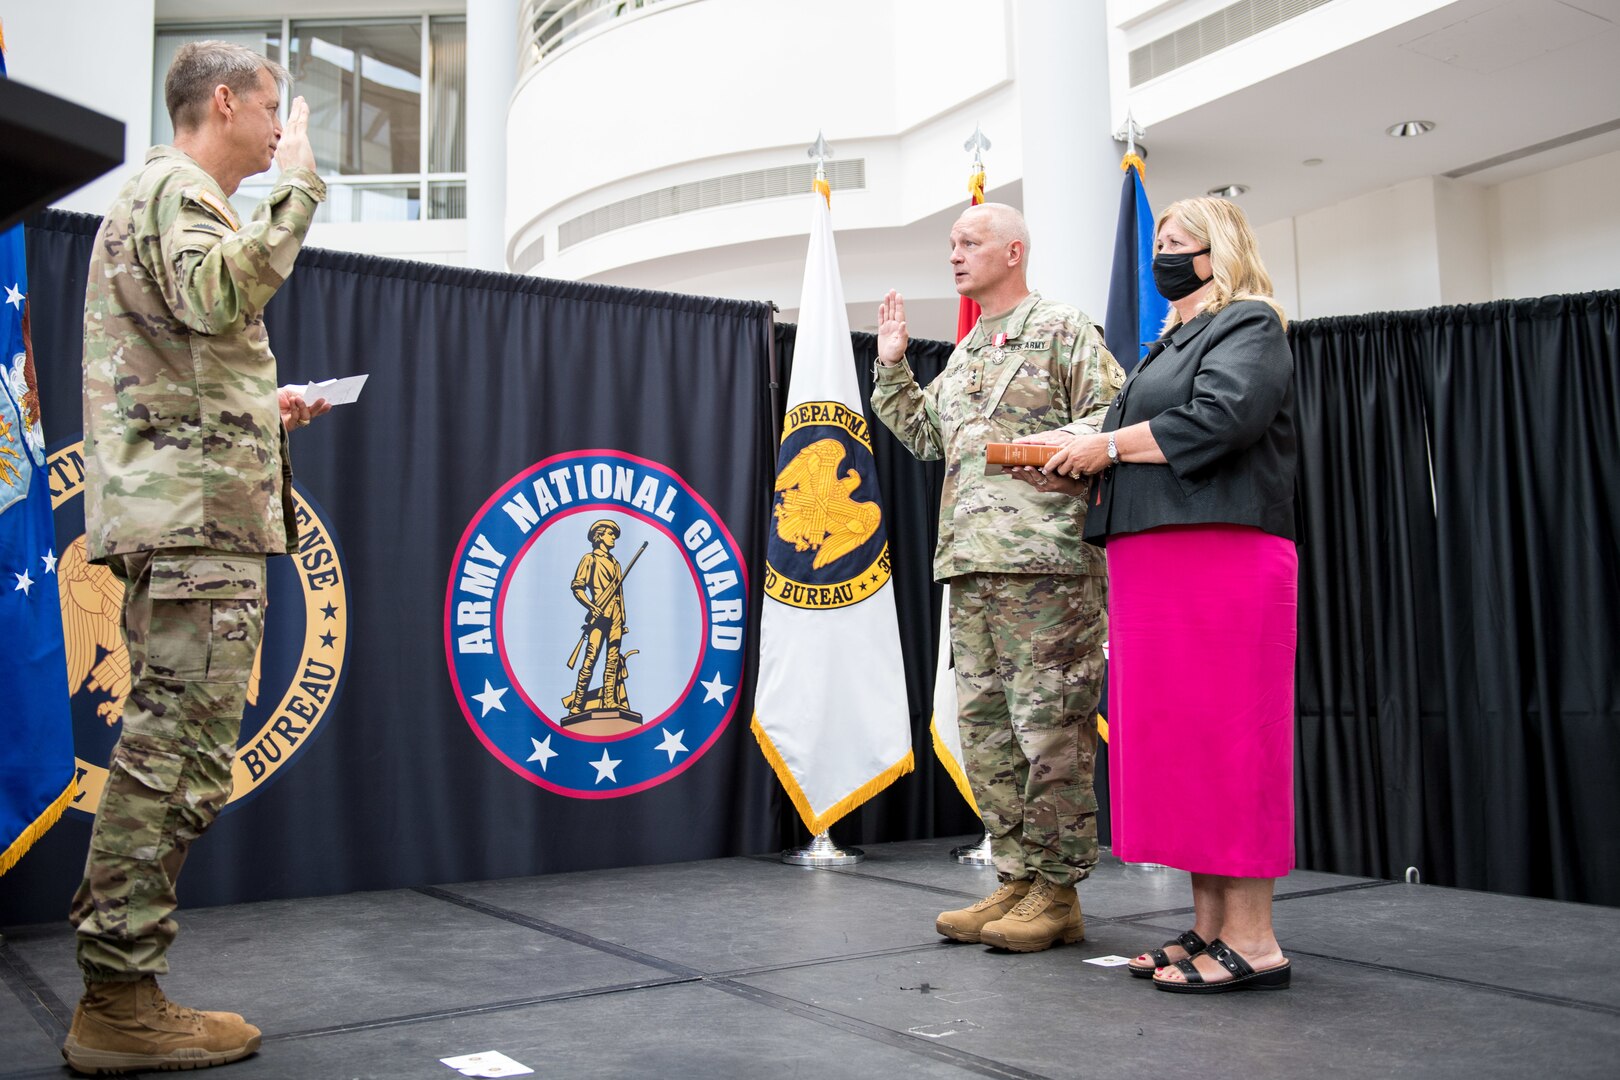 Gen. Daniel R. Hokanson, chief of the National Guard Bureau, administers the oath of office to Lt. Gen. Jon A. Jensen as the 22nd director of the Army National Guard Aug. 10, 2020, at the Temple Army National Guard Readiness Center in Arlington, Virginia.